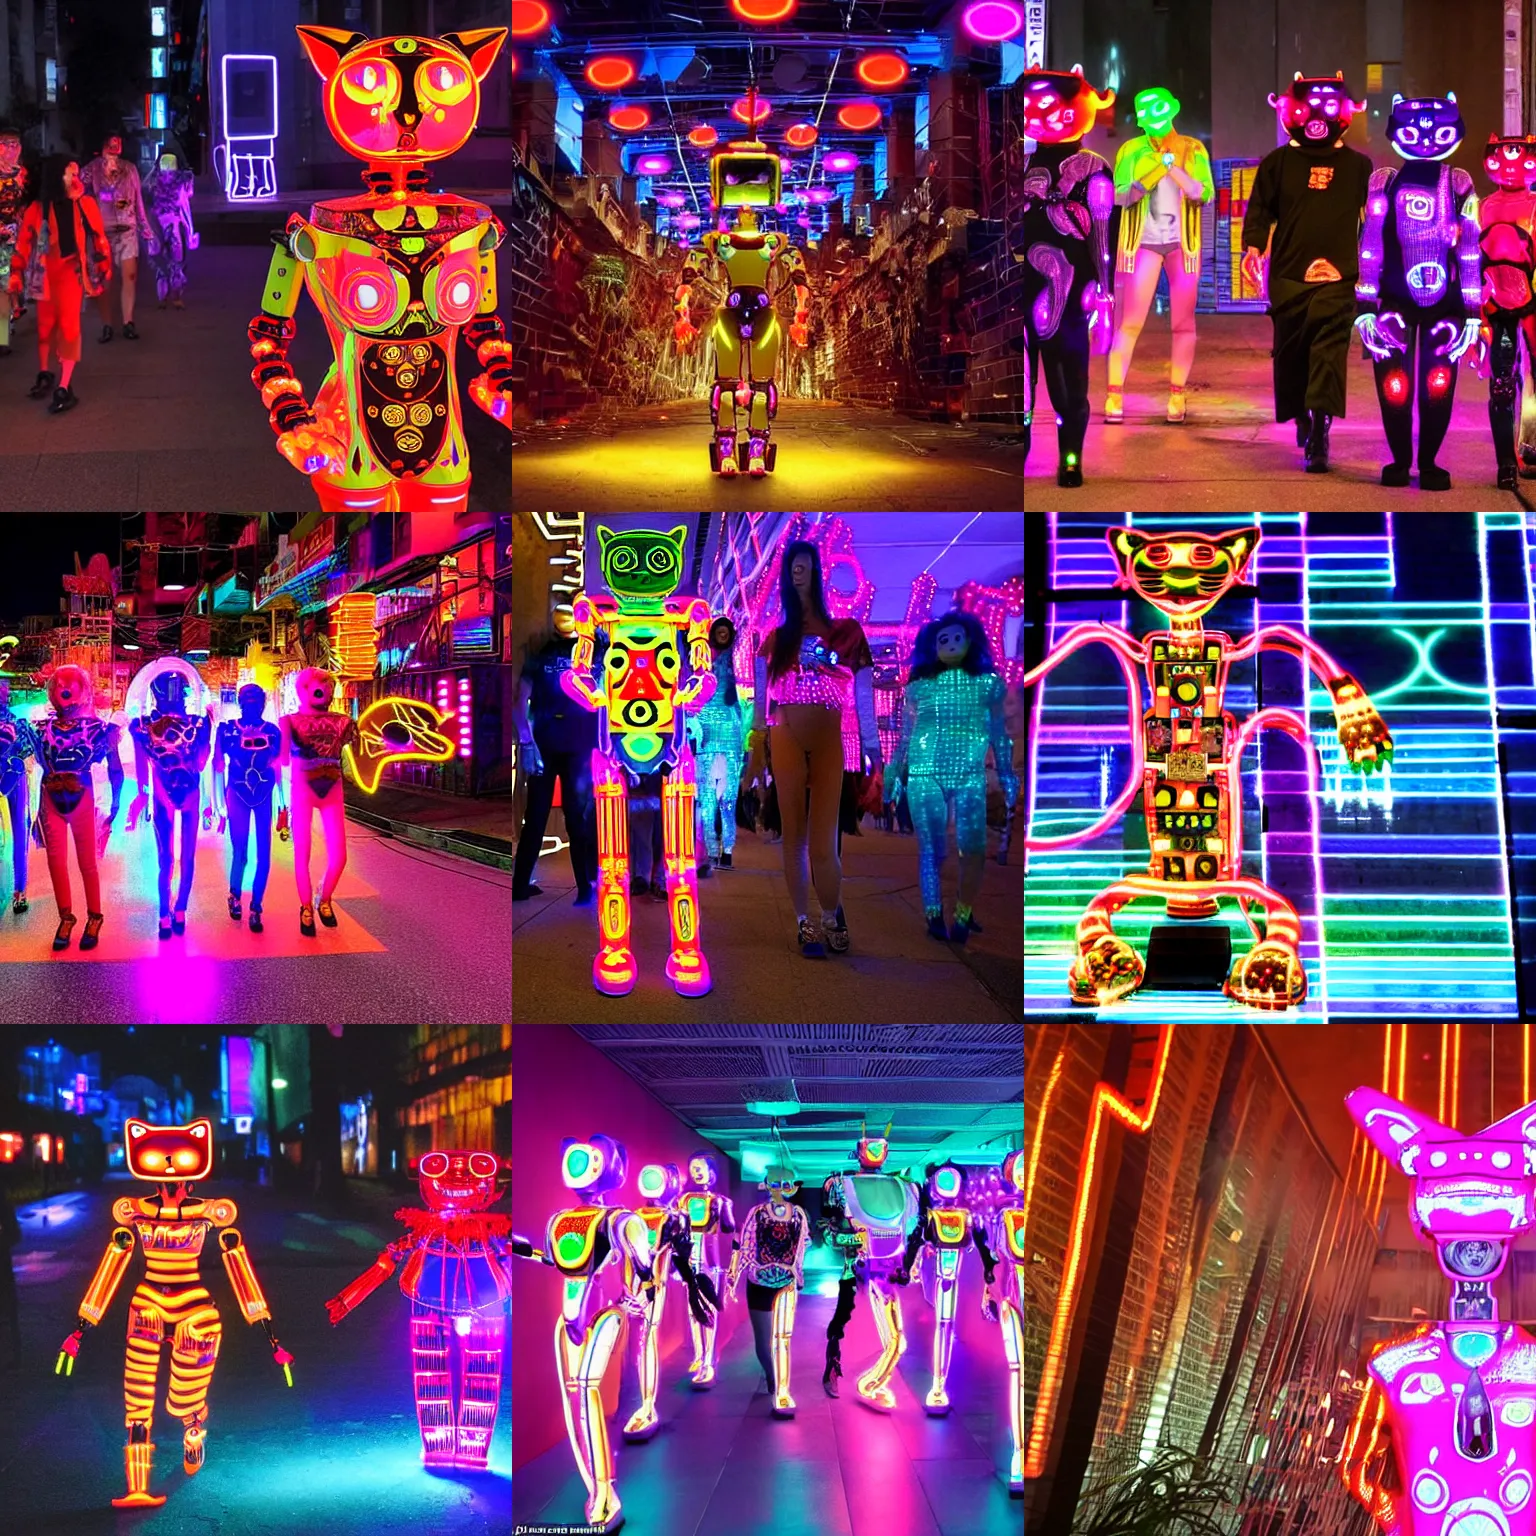 Prompt: Eight humanoid robots dressed in psychedelic kimonos walk through a dark city lit by neon lights while playing various musical instruments, guided by an eerily glowing red cat. One of them is a female robot